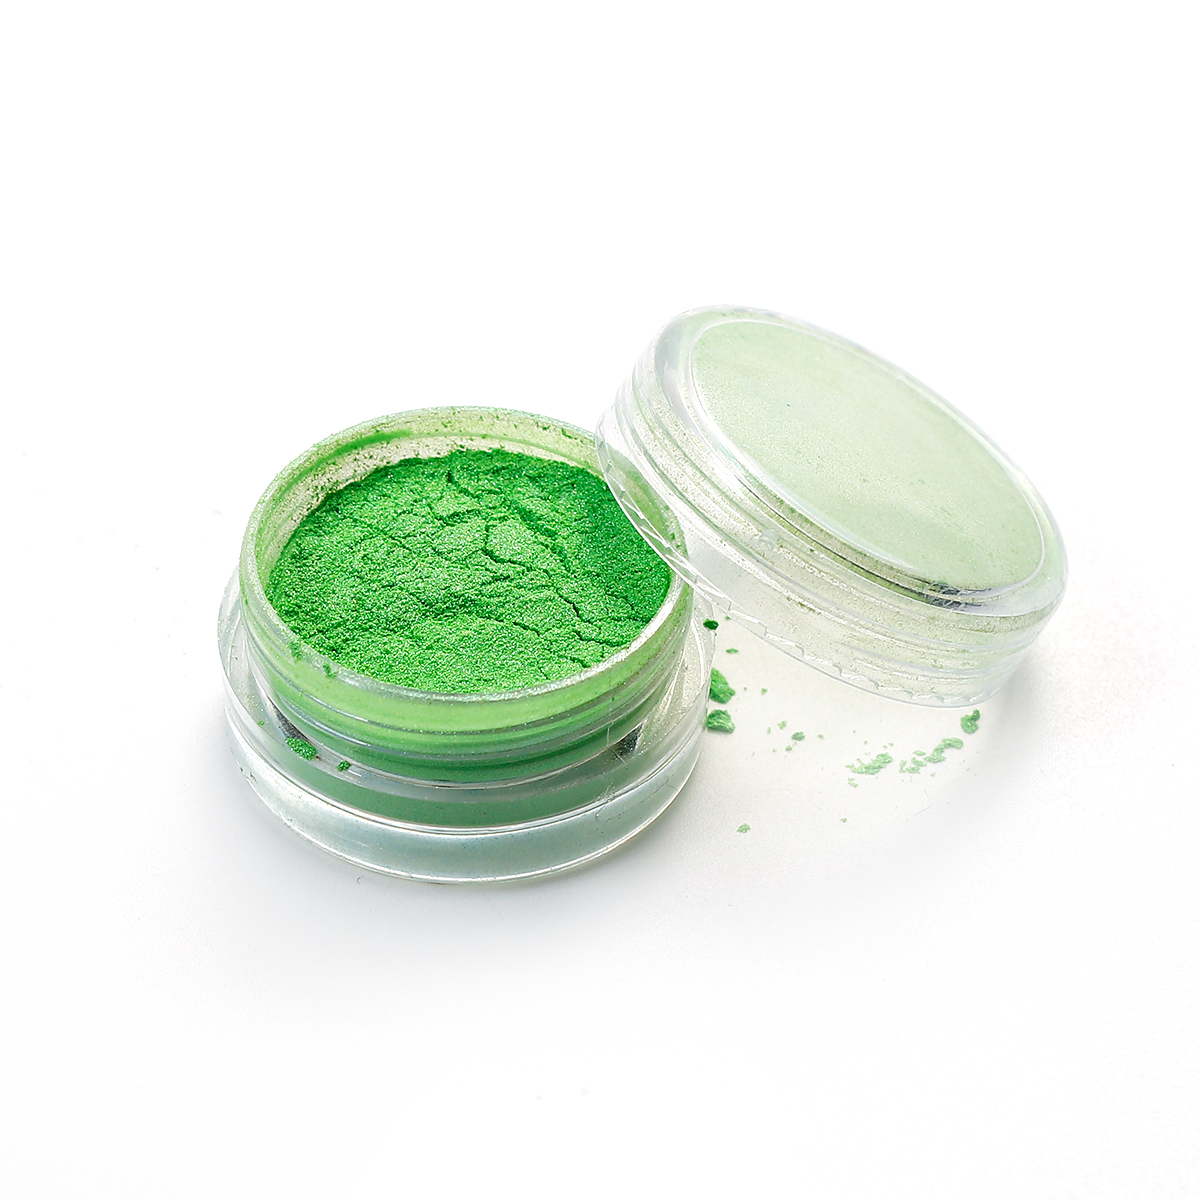 Picture of Resin Jewelry DIY Making Craft Glitter Powder Green 30mm(1 1/8") Dia., 1 Piece